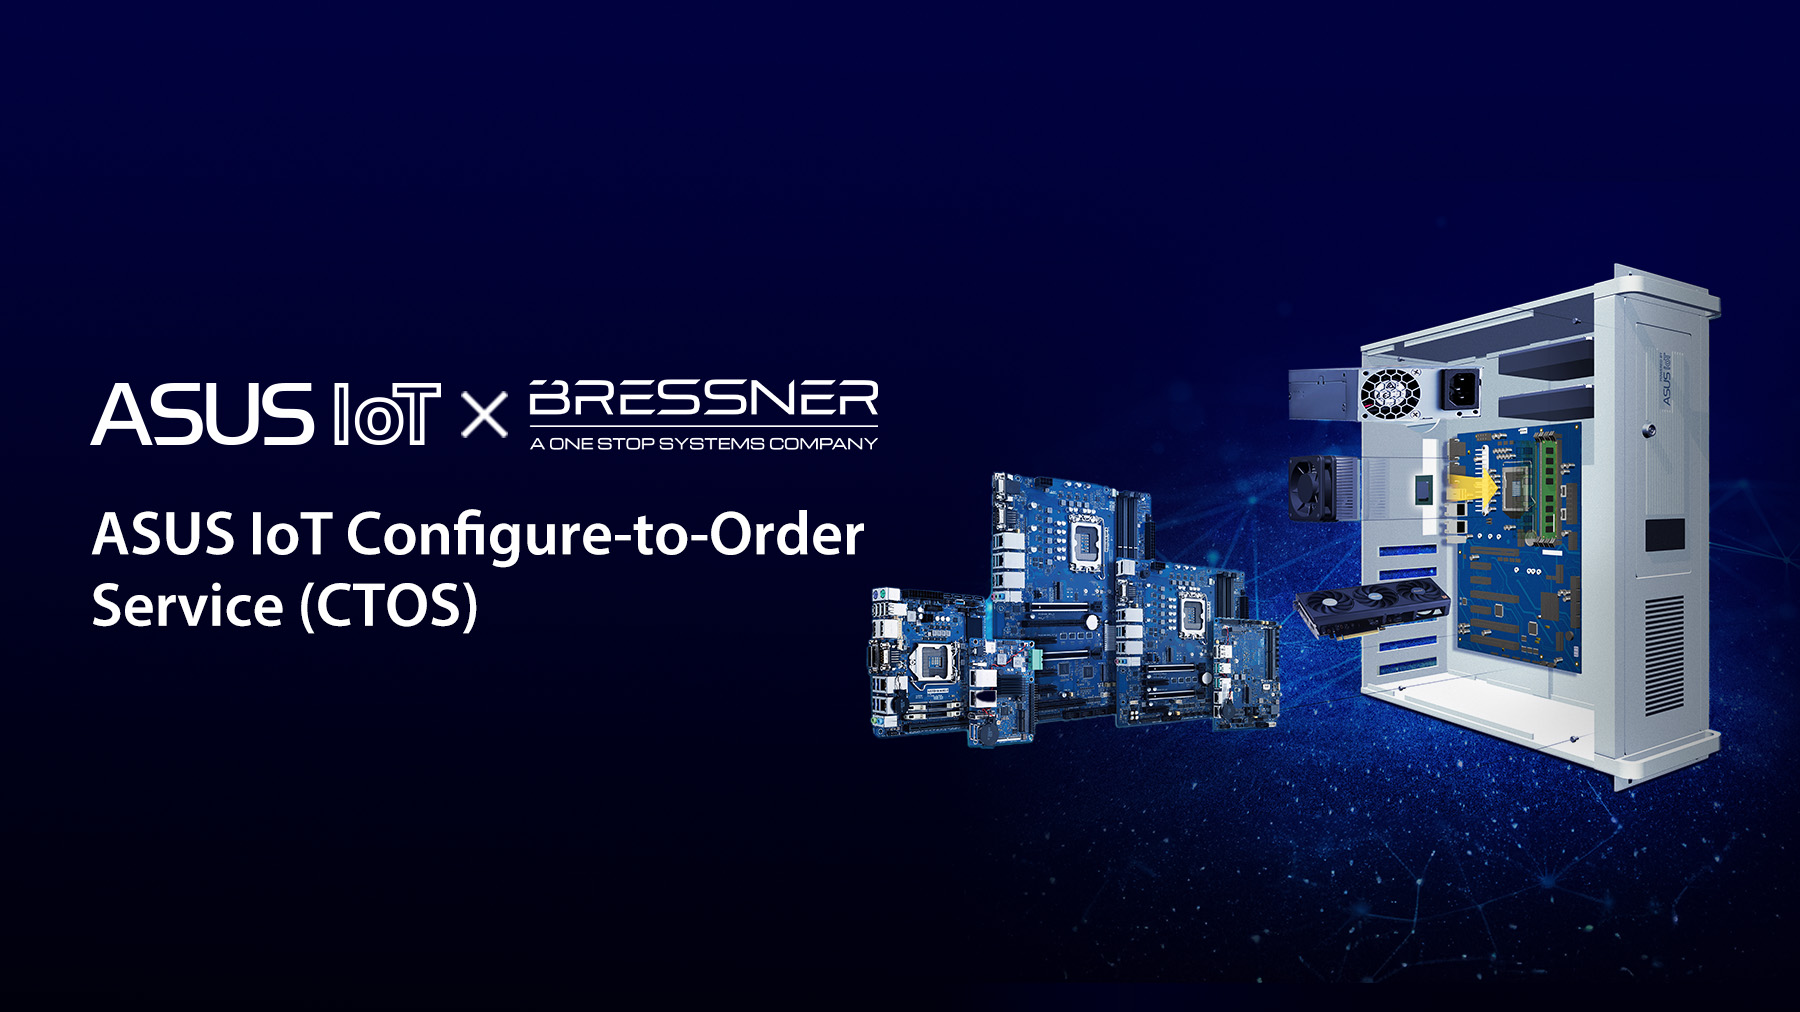 Dark blue background showcasing ASUS IoT and BRESSNER logos, alongside modular products and industrial motherboards. Announcement of ASUS IoT's partnership with BRESSNER for the launch of the ASUS IoT Configure-to-Order Service (CTOS) Solution.